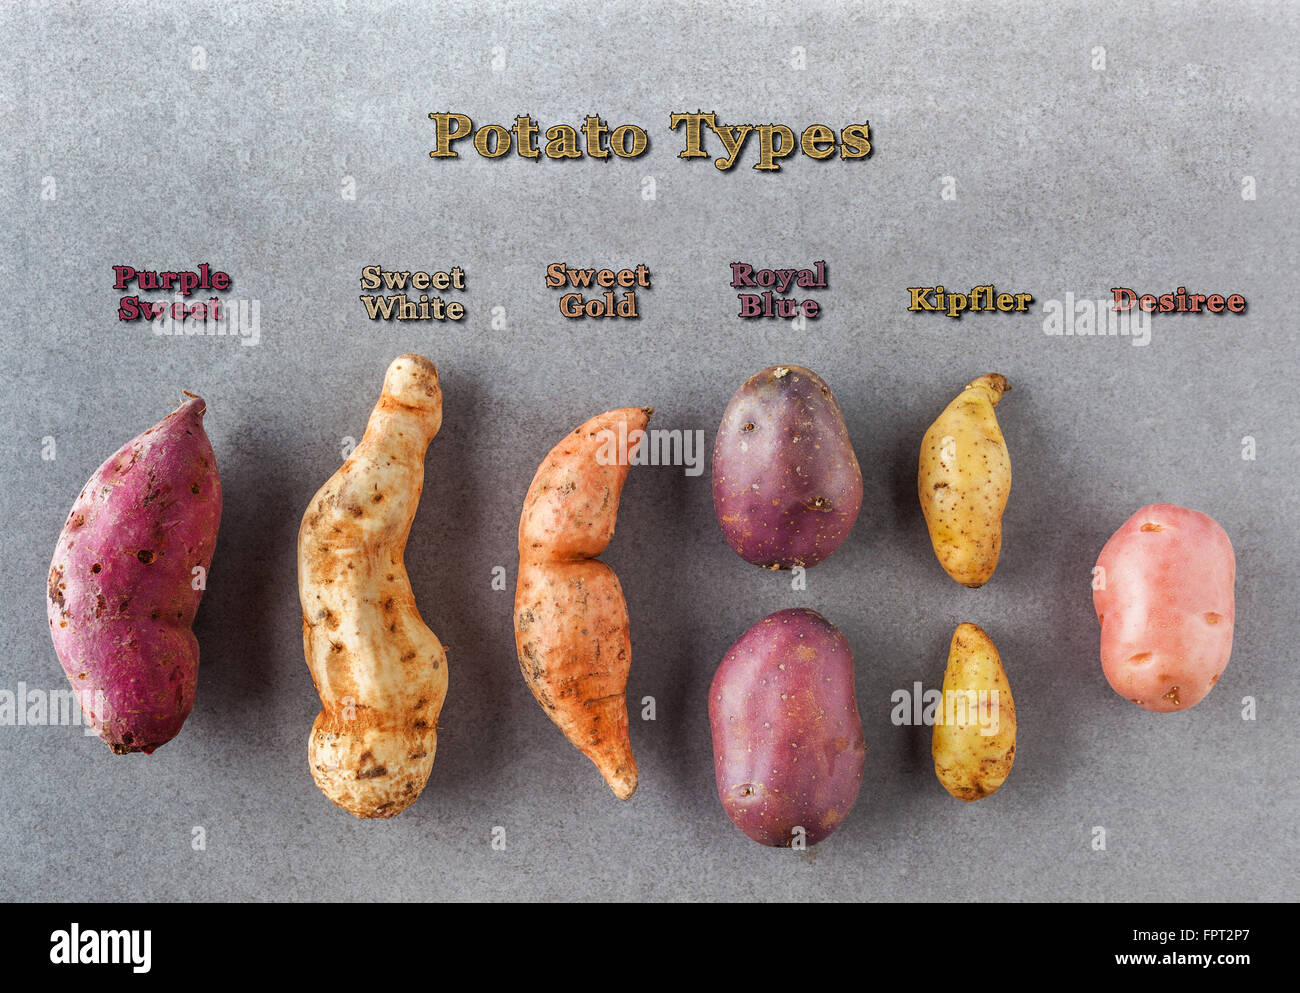 different-kinds-of-potatoes-flat-lay-on-stone-surface-with-text-labels-FPT2P7.jpg